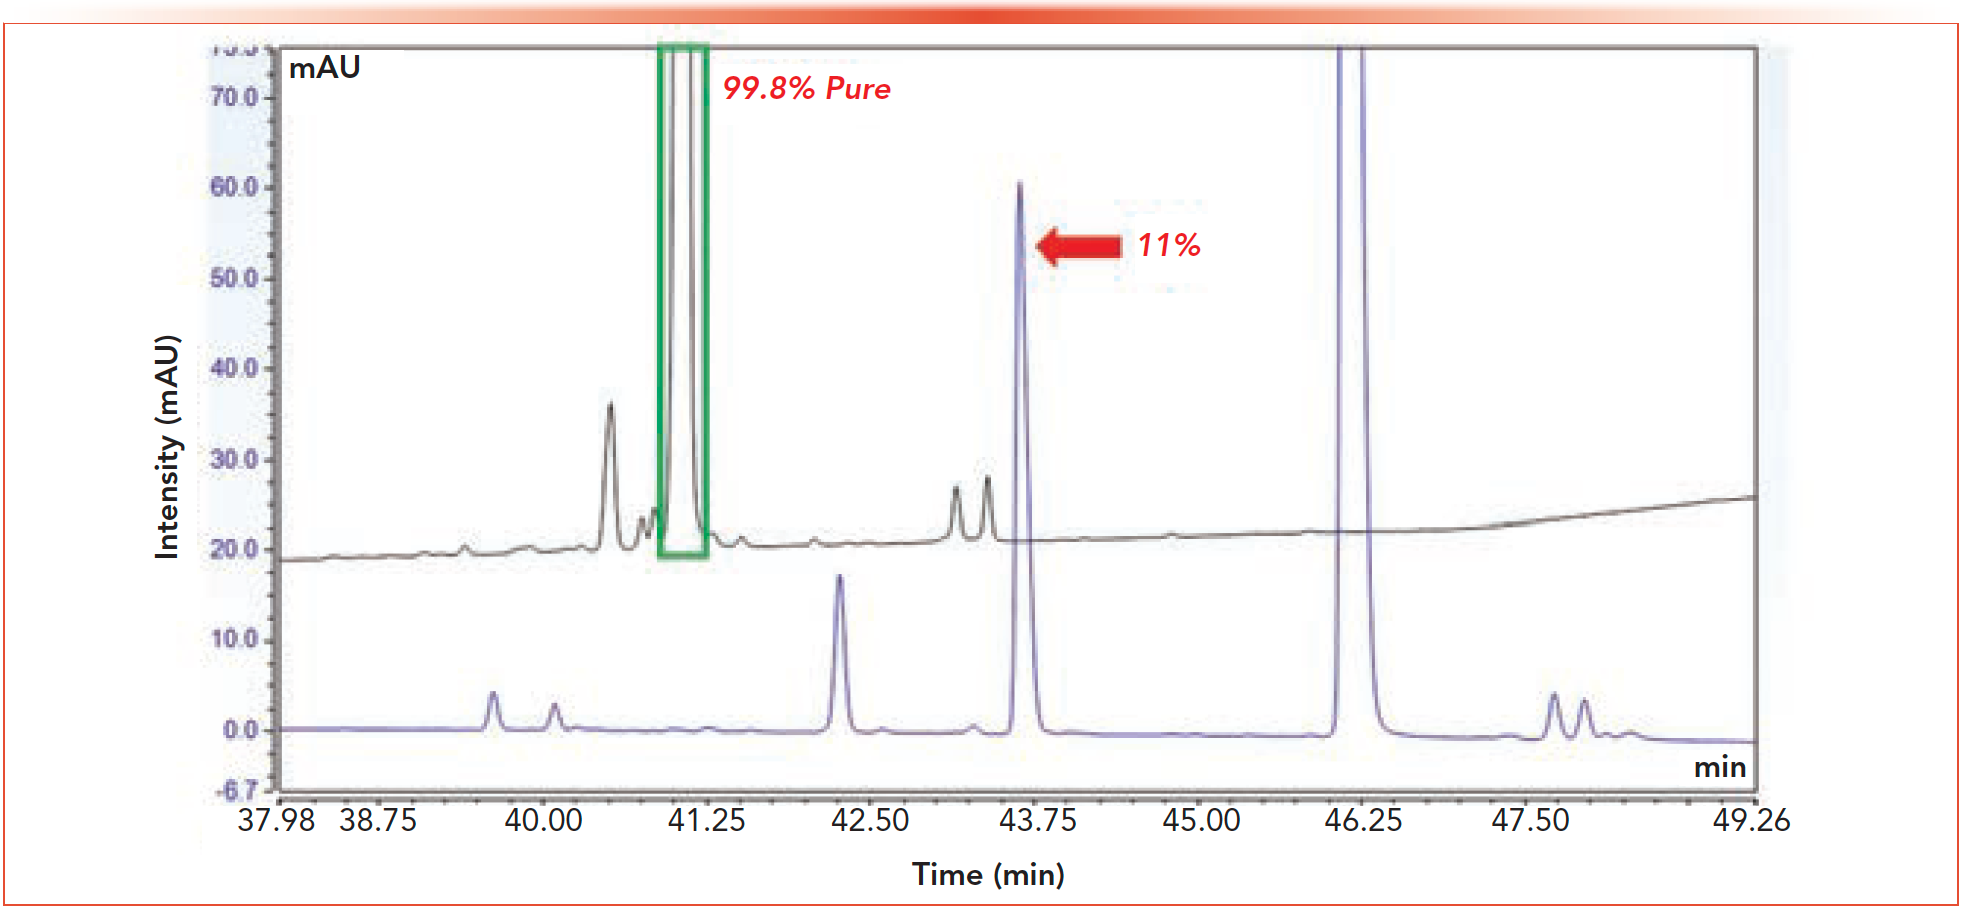 FIGURE 2: Single dimension HPLC chromatograms showing the API peak of interest (highlighted in green, black trace) which the DAD software labeled as 99.8% pure. The blue trace shows the result of a modification to the method which resolved an 11% impurity previously co-eluted with the API. See the experimental section for detailed information on experimental conditions.